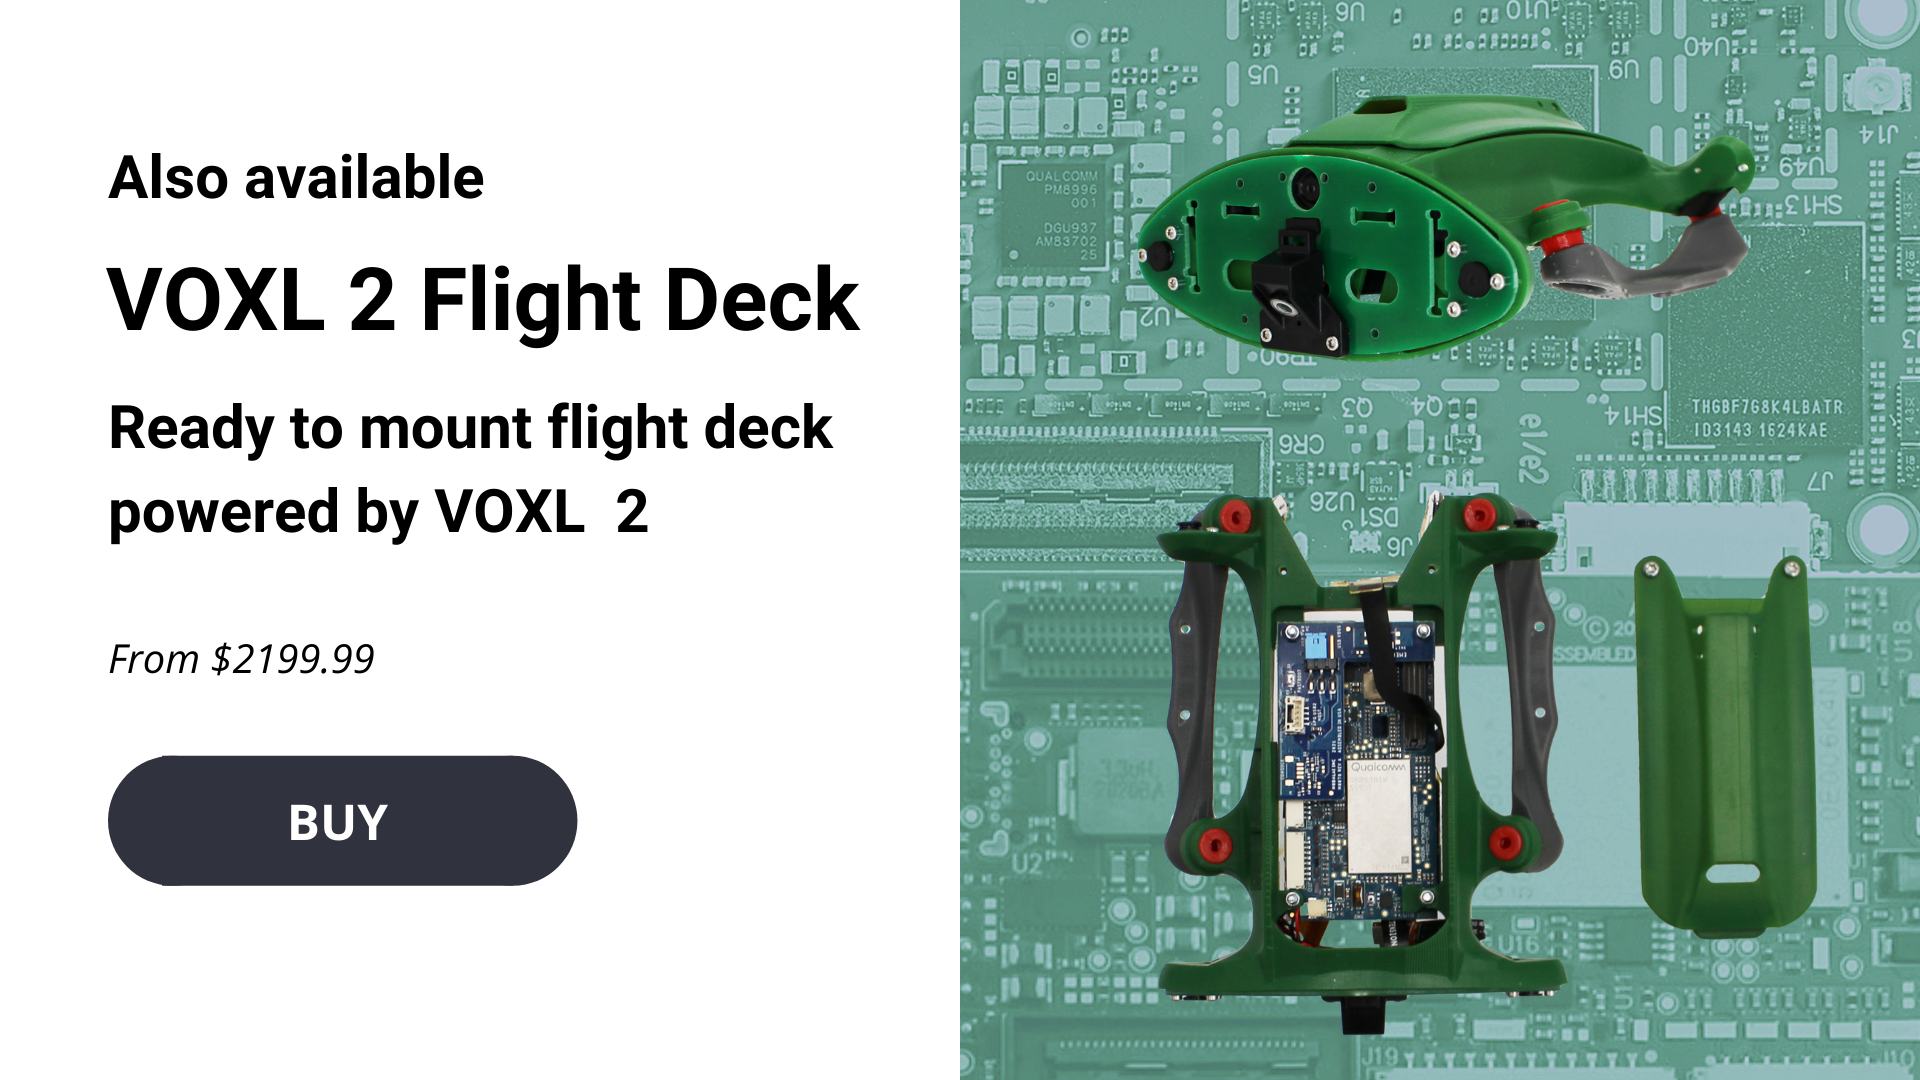 Also Available VOXL 2 Flight Deck Ready to fly flight deck powered by VOXL 2 from $2199 BUY